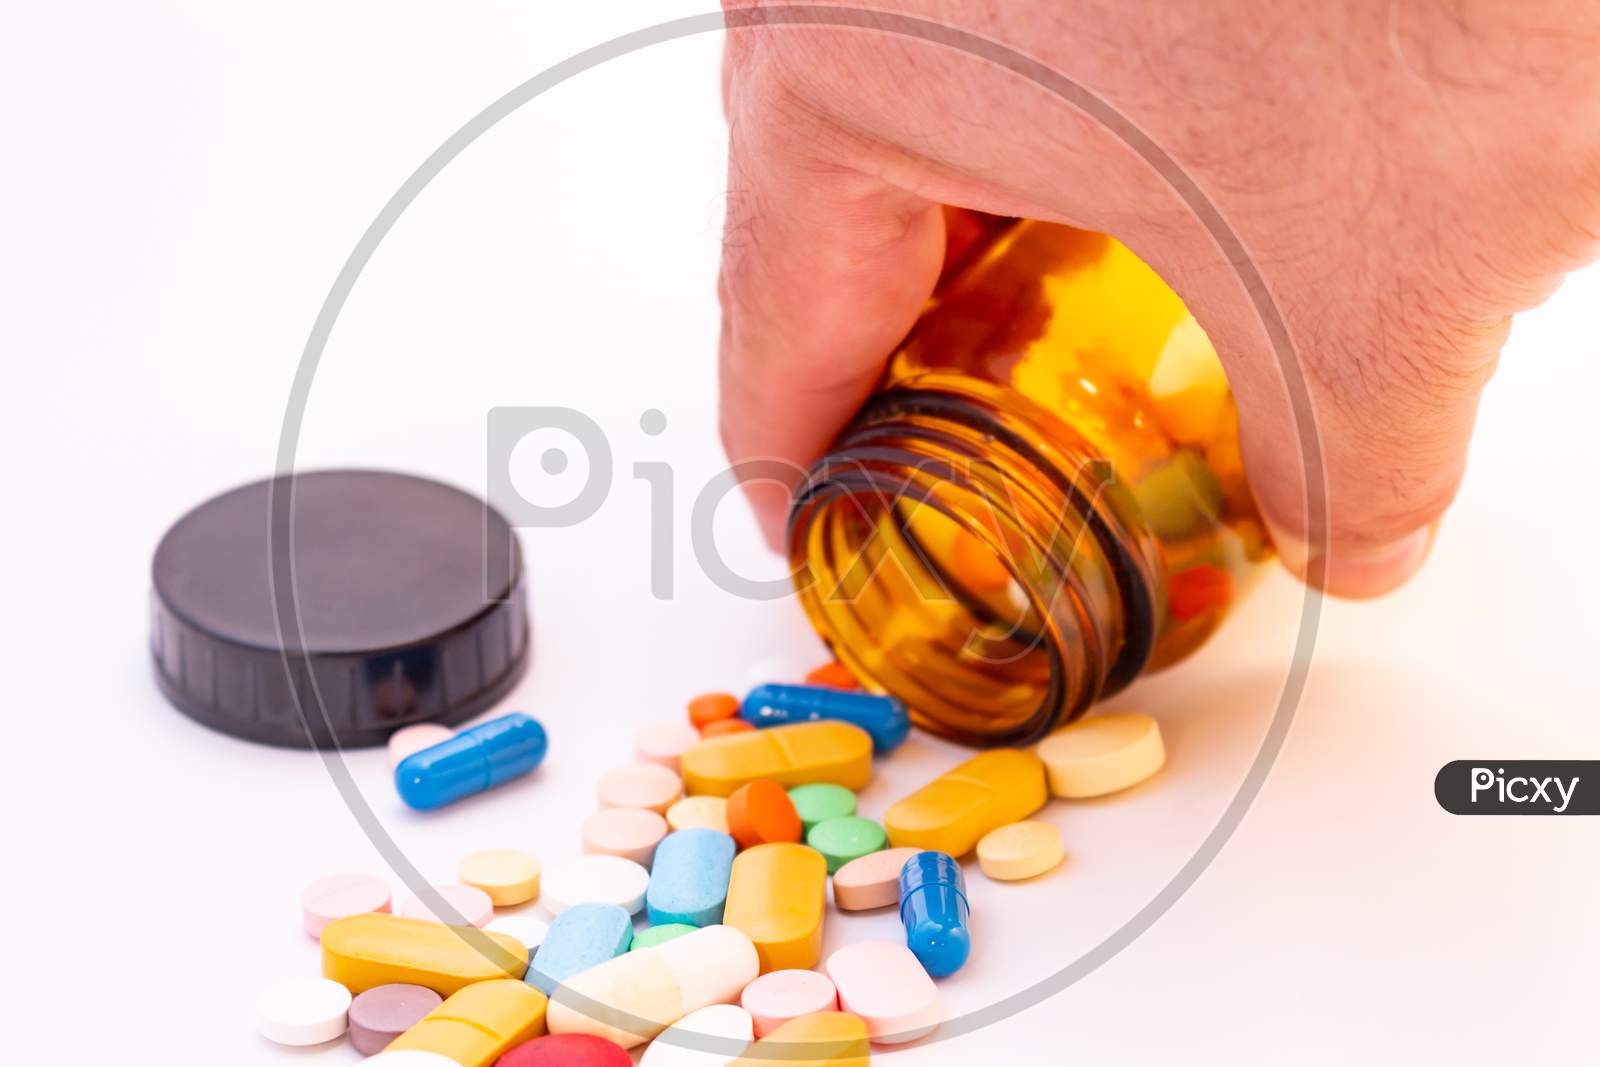 Medications In The Form Of Pills And Capsules On A White Background. Hand Of A Man Holding A Brown Glass Jar.